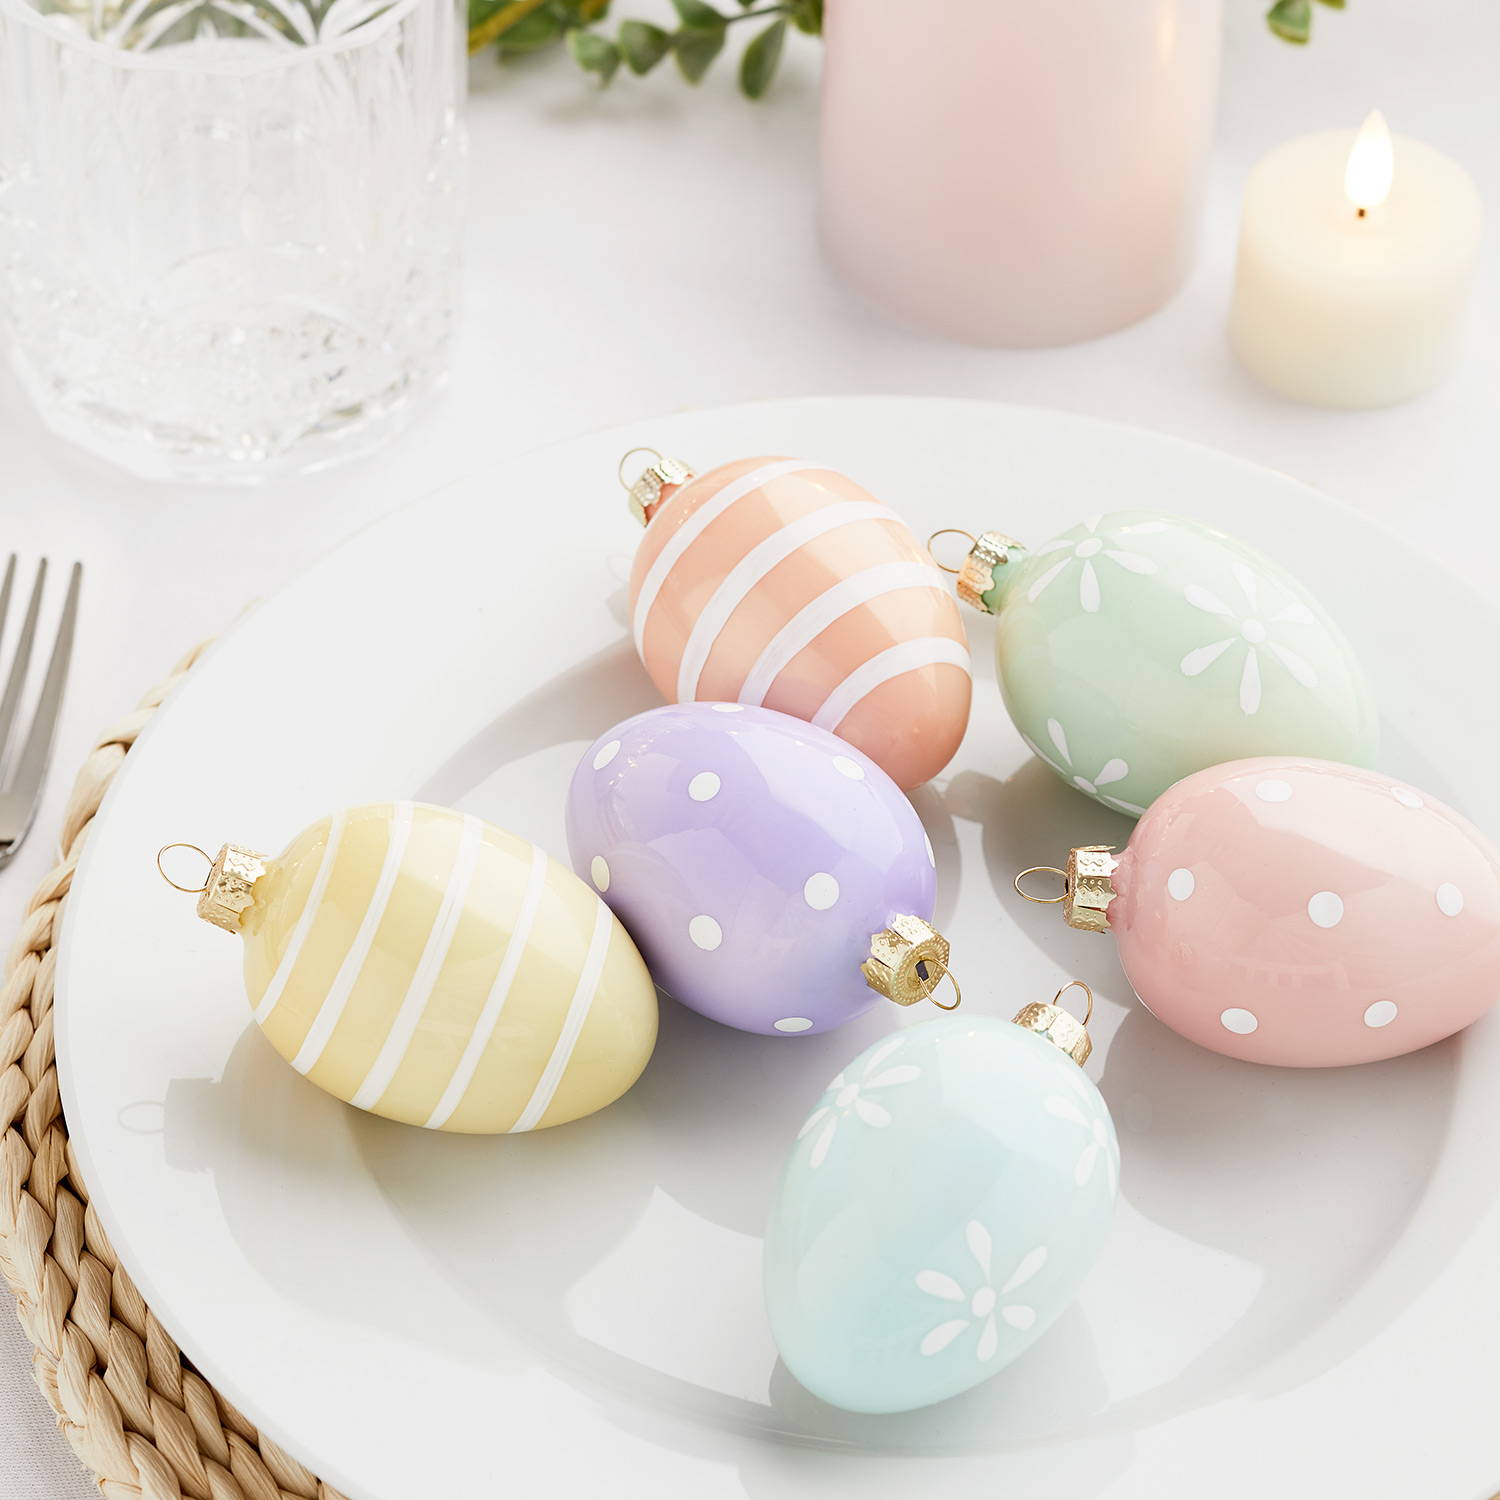 6 pastel coloured galss egg decorations on a plate as part of an Easter dining experience.